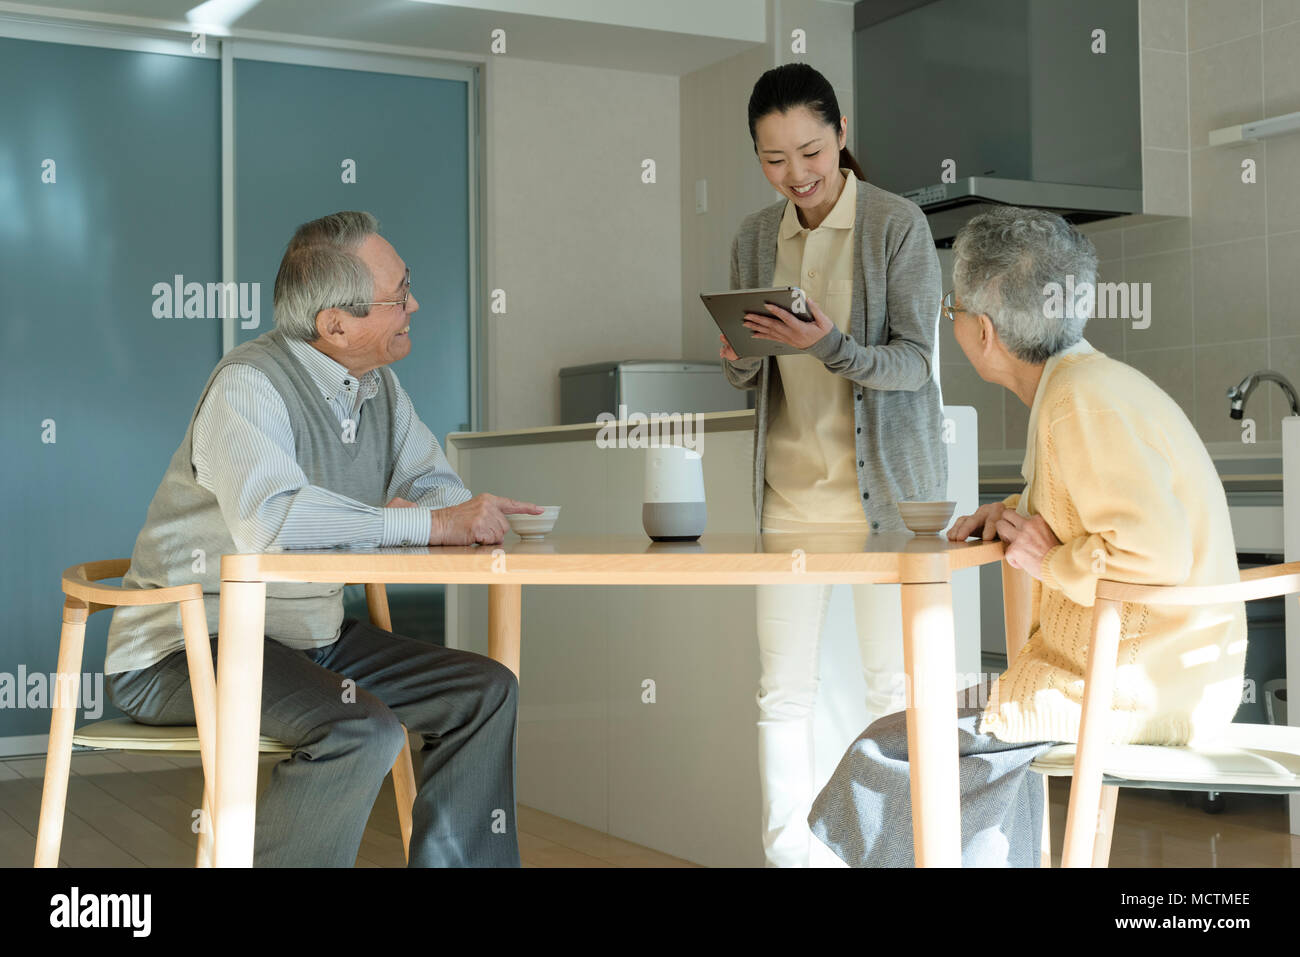 Care worker asking about senior couple's condition Stock Photo